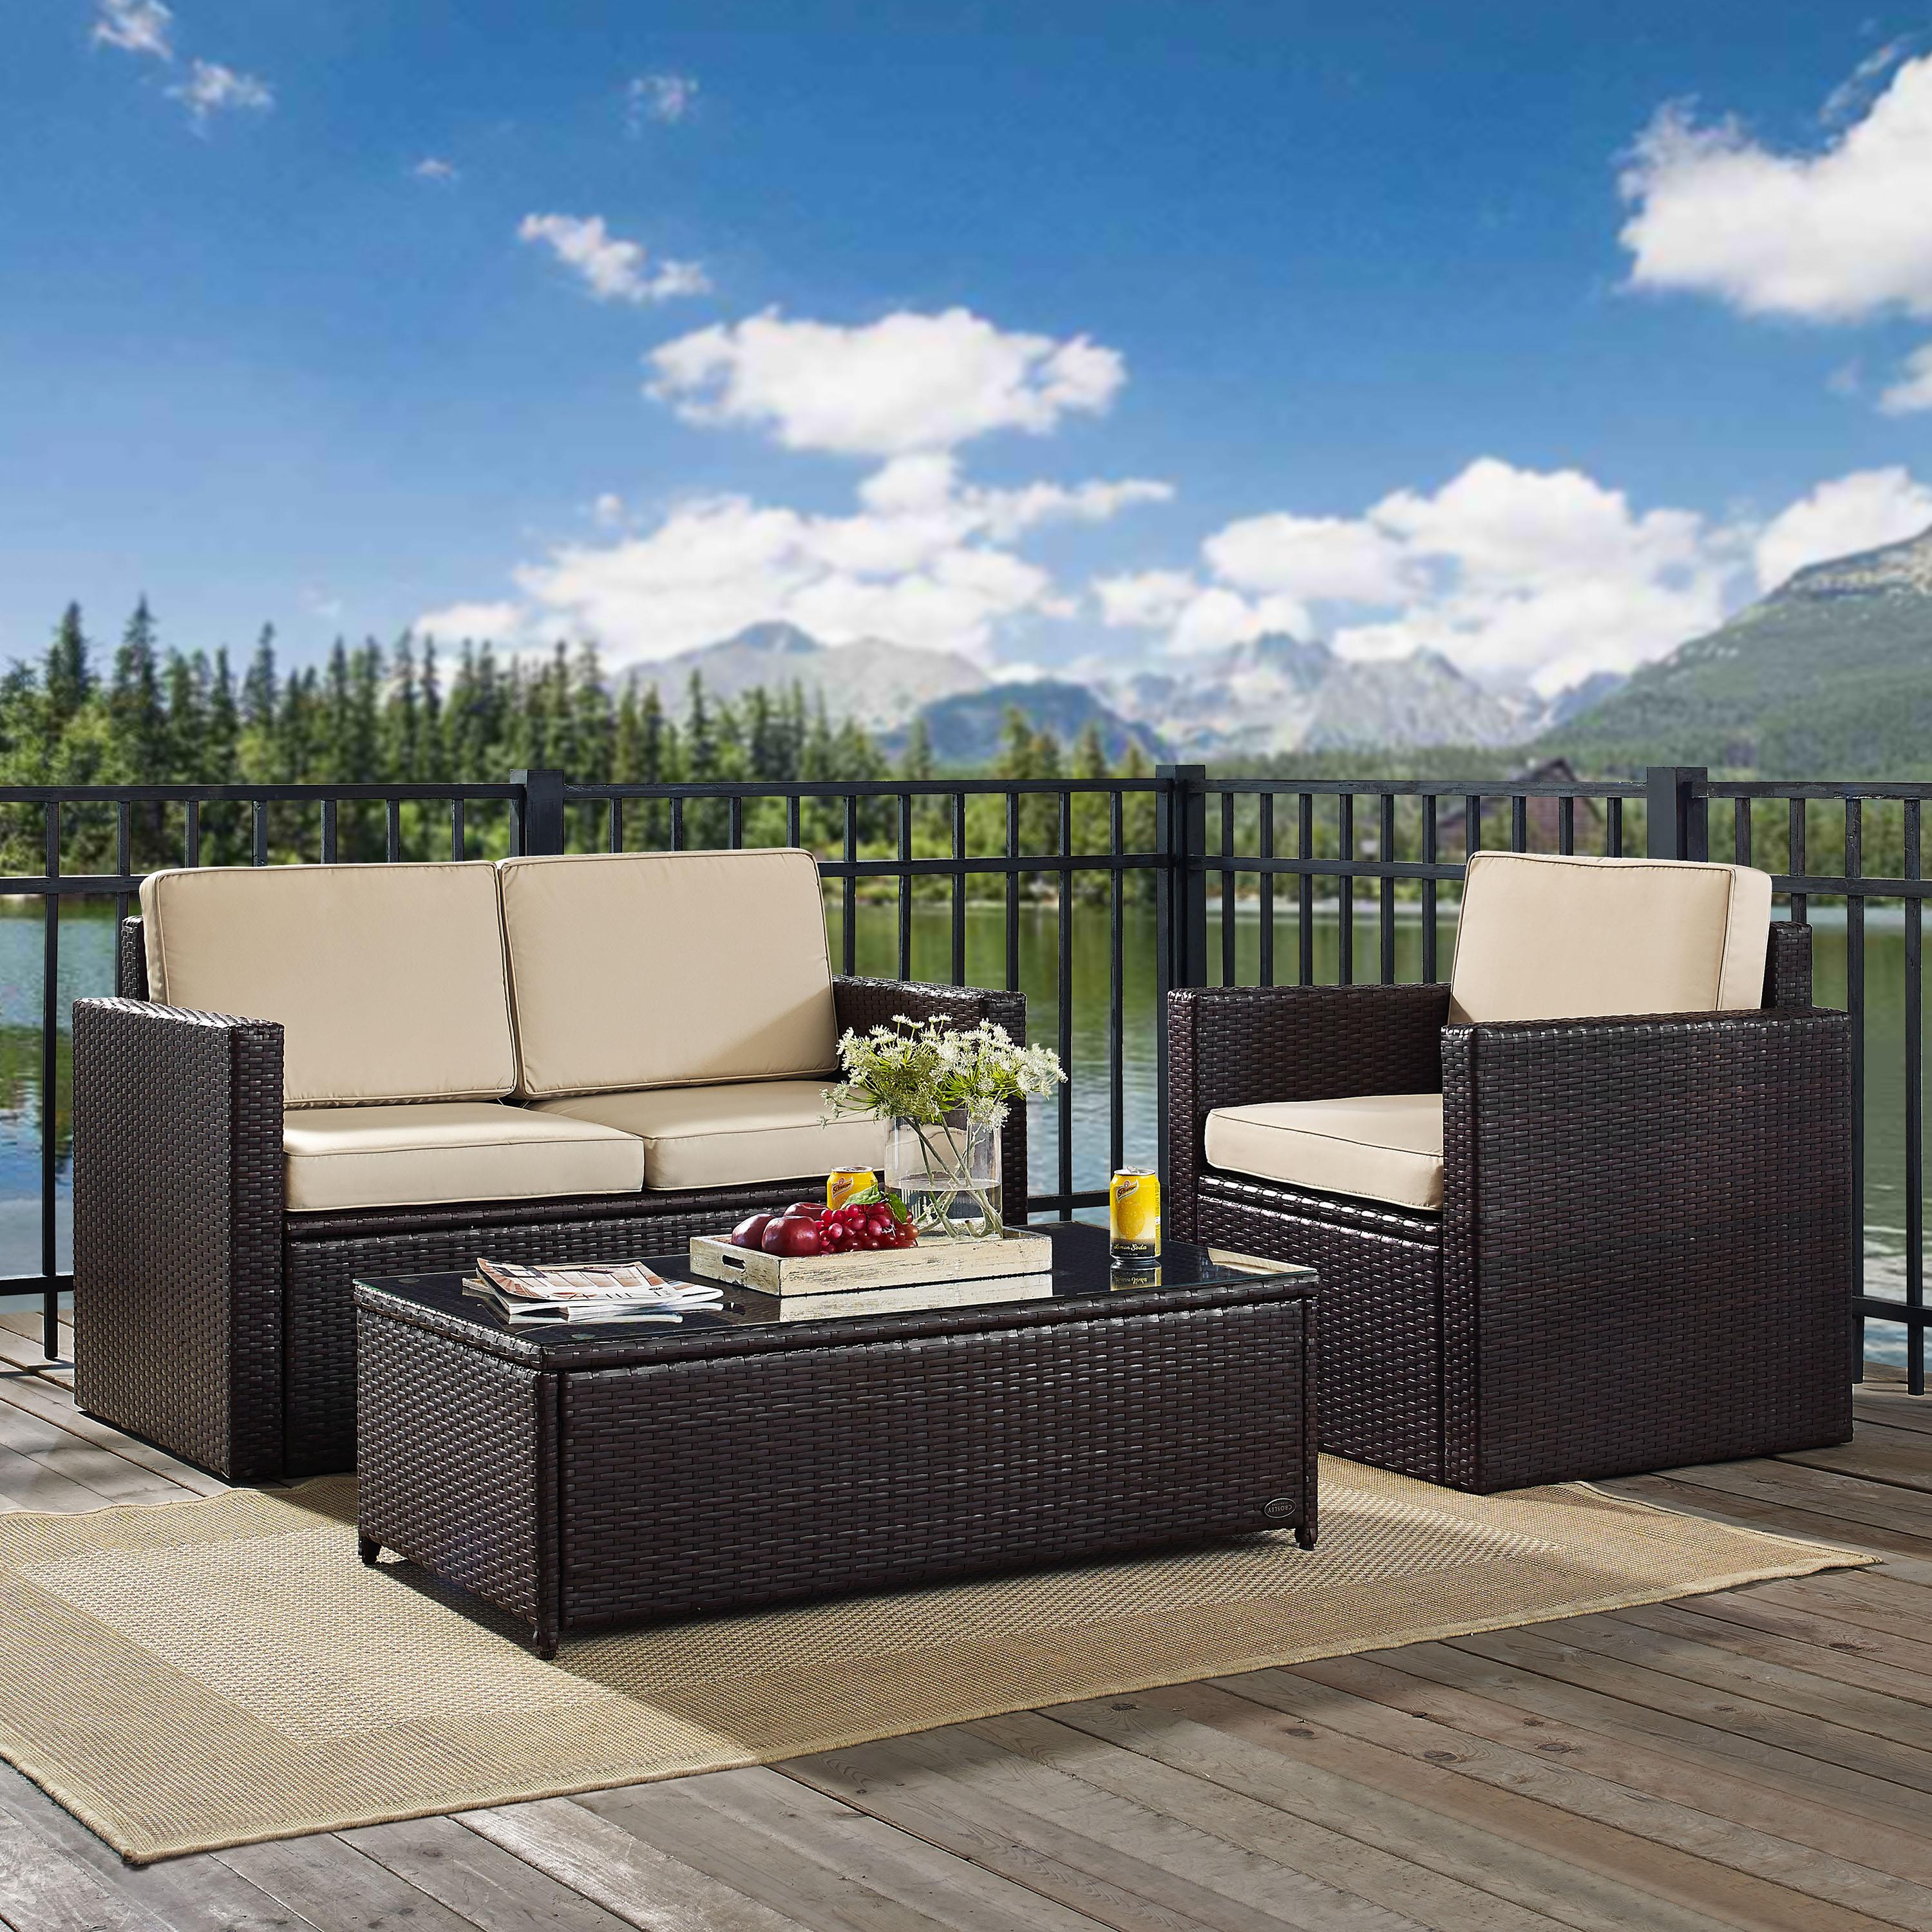 Crosley Palm Harbor 3 Piece Wicker Patio Sofa Set in Brown and Sand - image 2 of 4